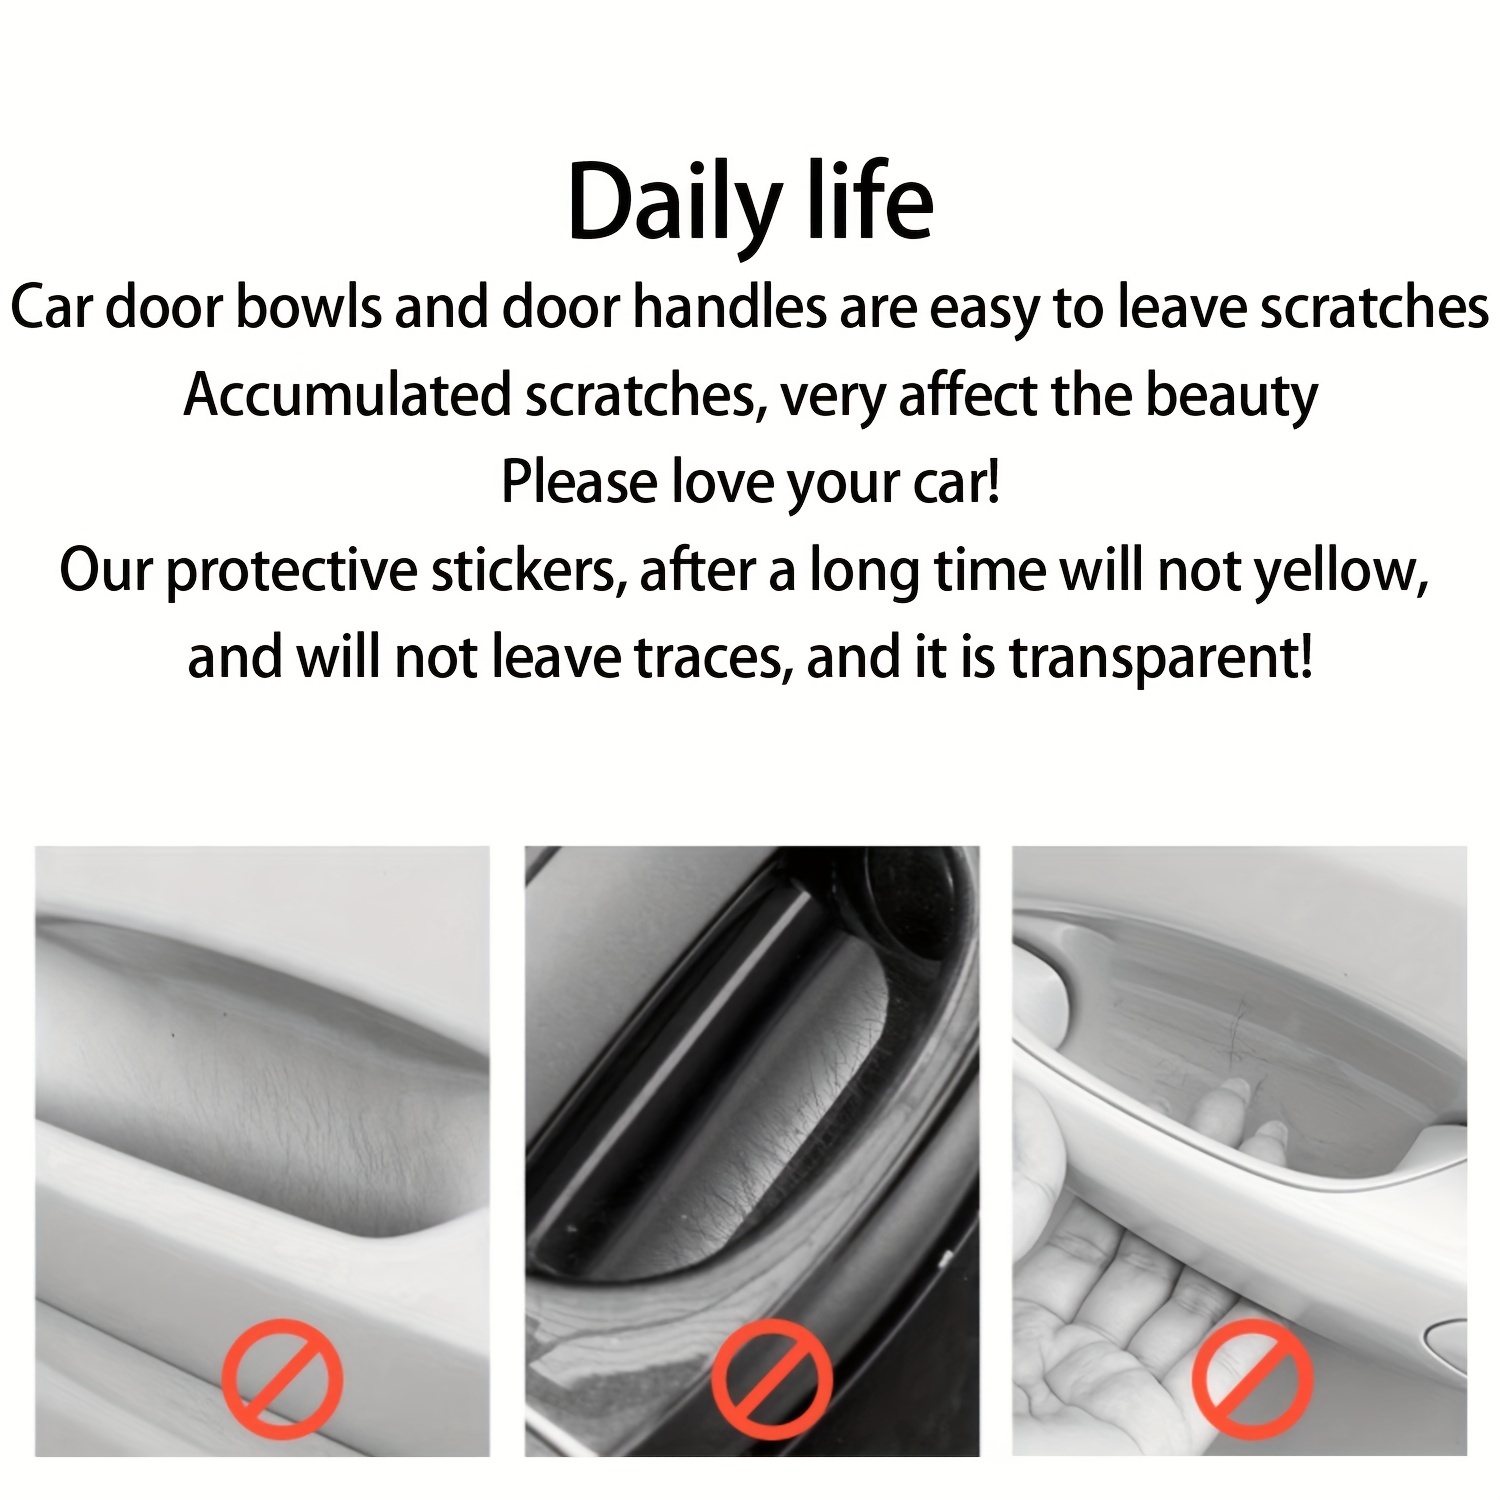 How to Remove Scratches from Car Door Handles